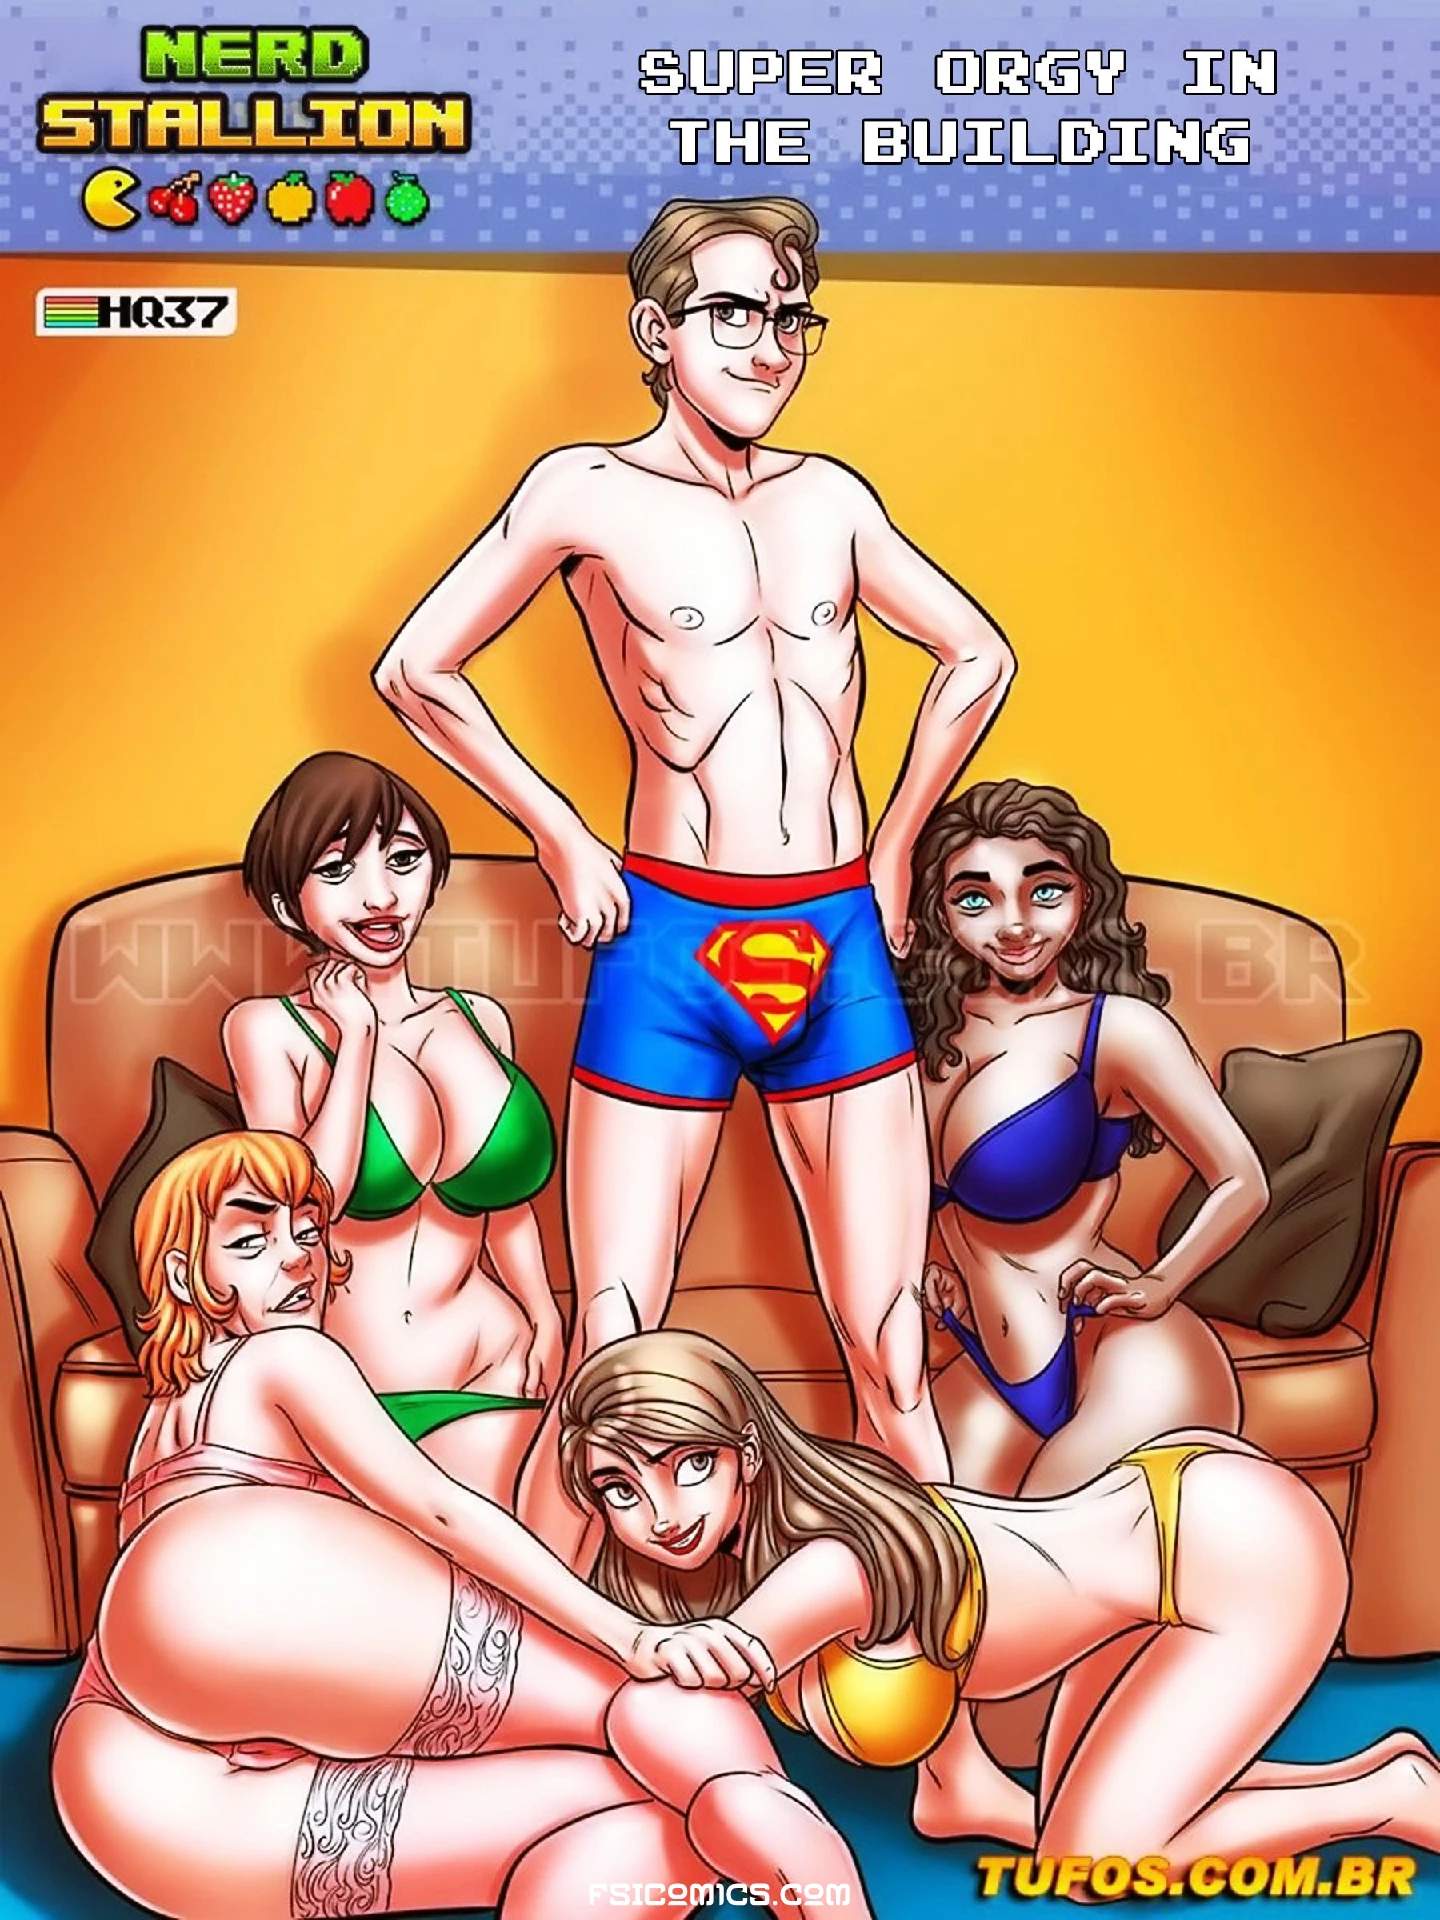 The Nerd Stallion Chapter 37 – Super Orgy in the Building – WC TF - 75 - FSIComics